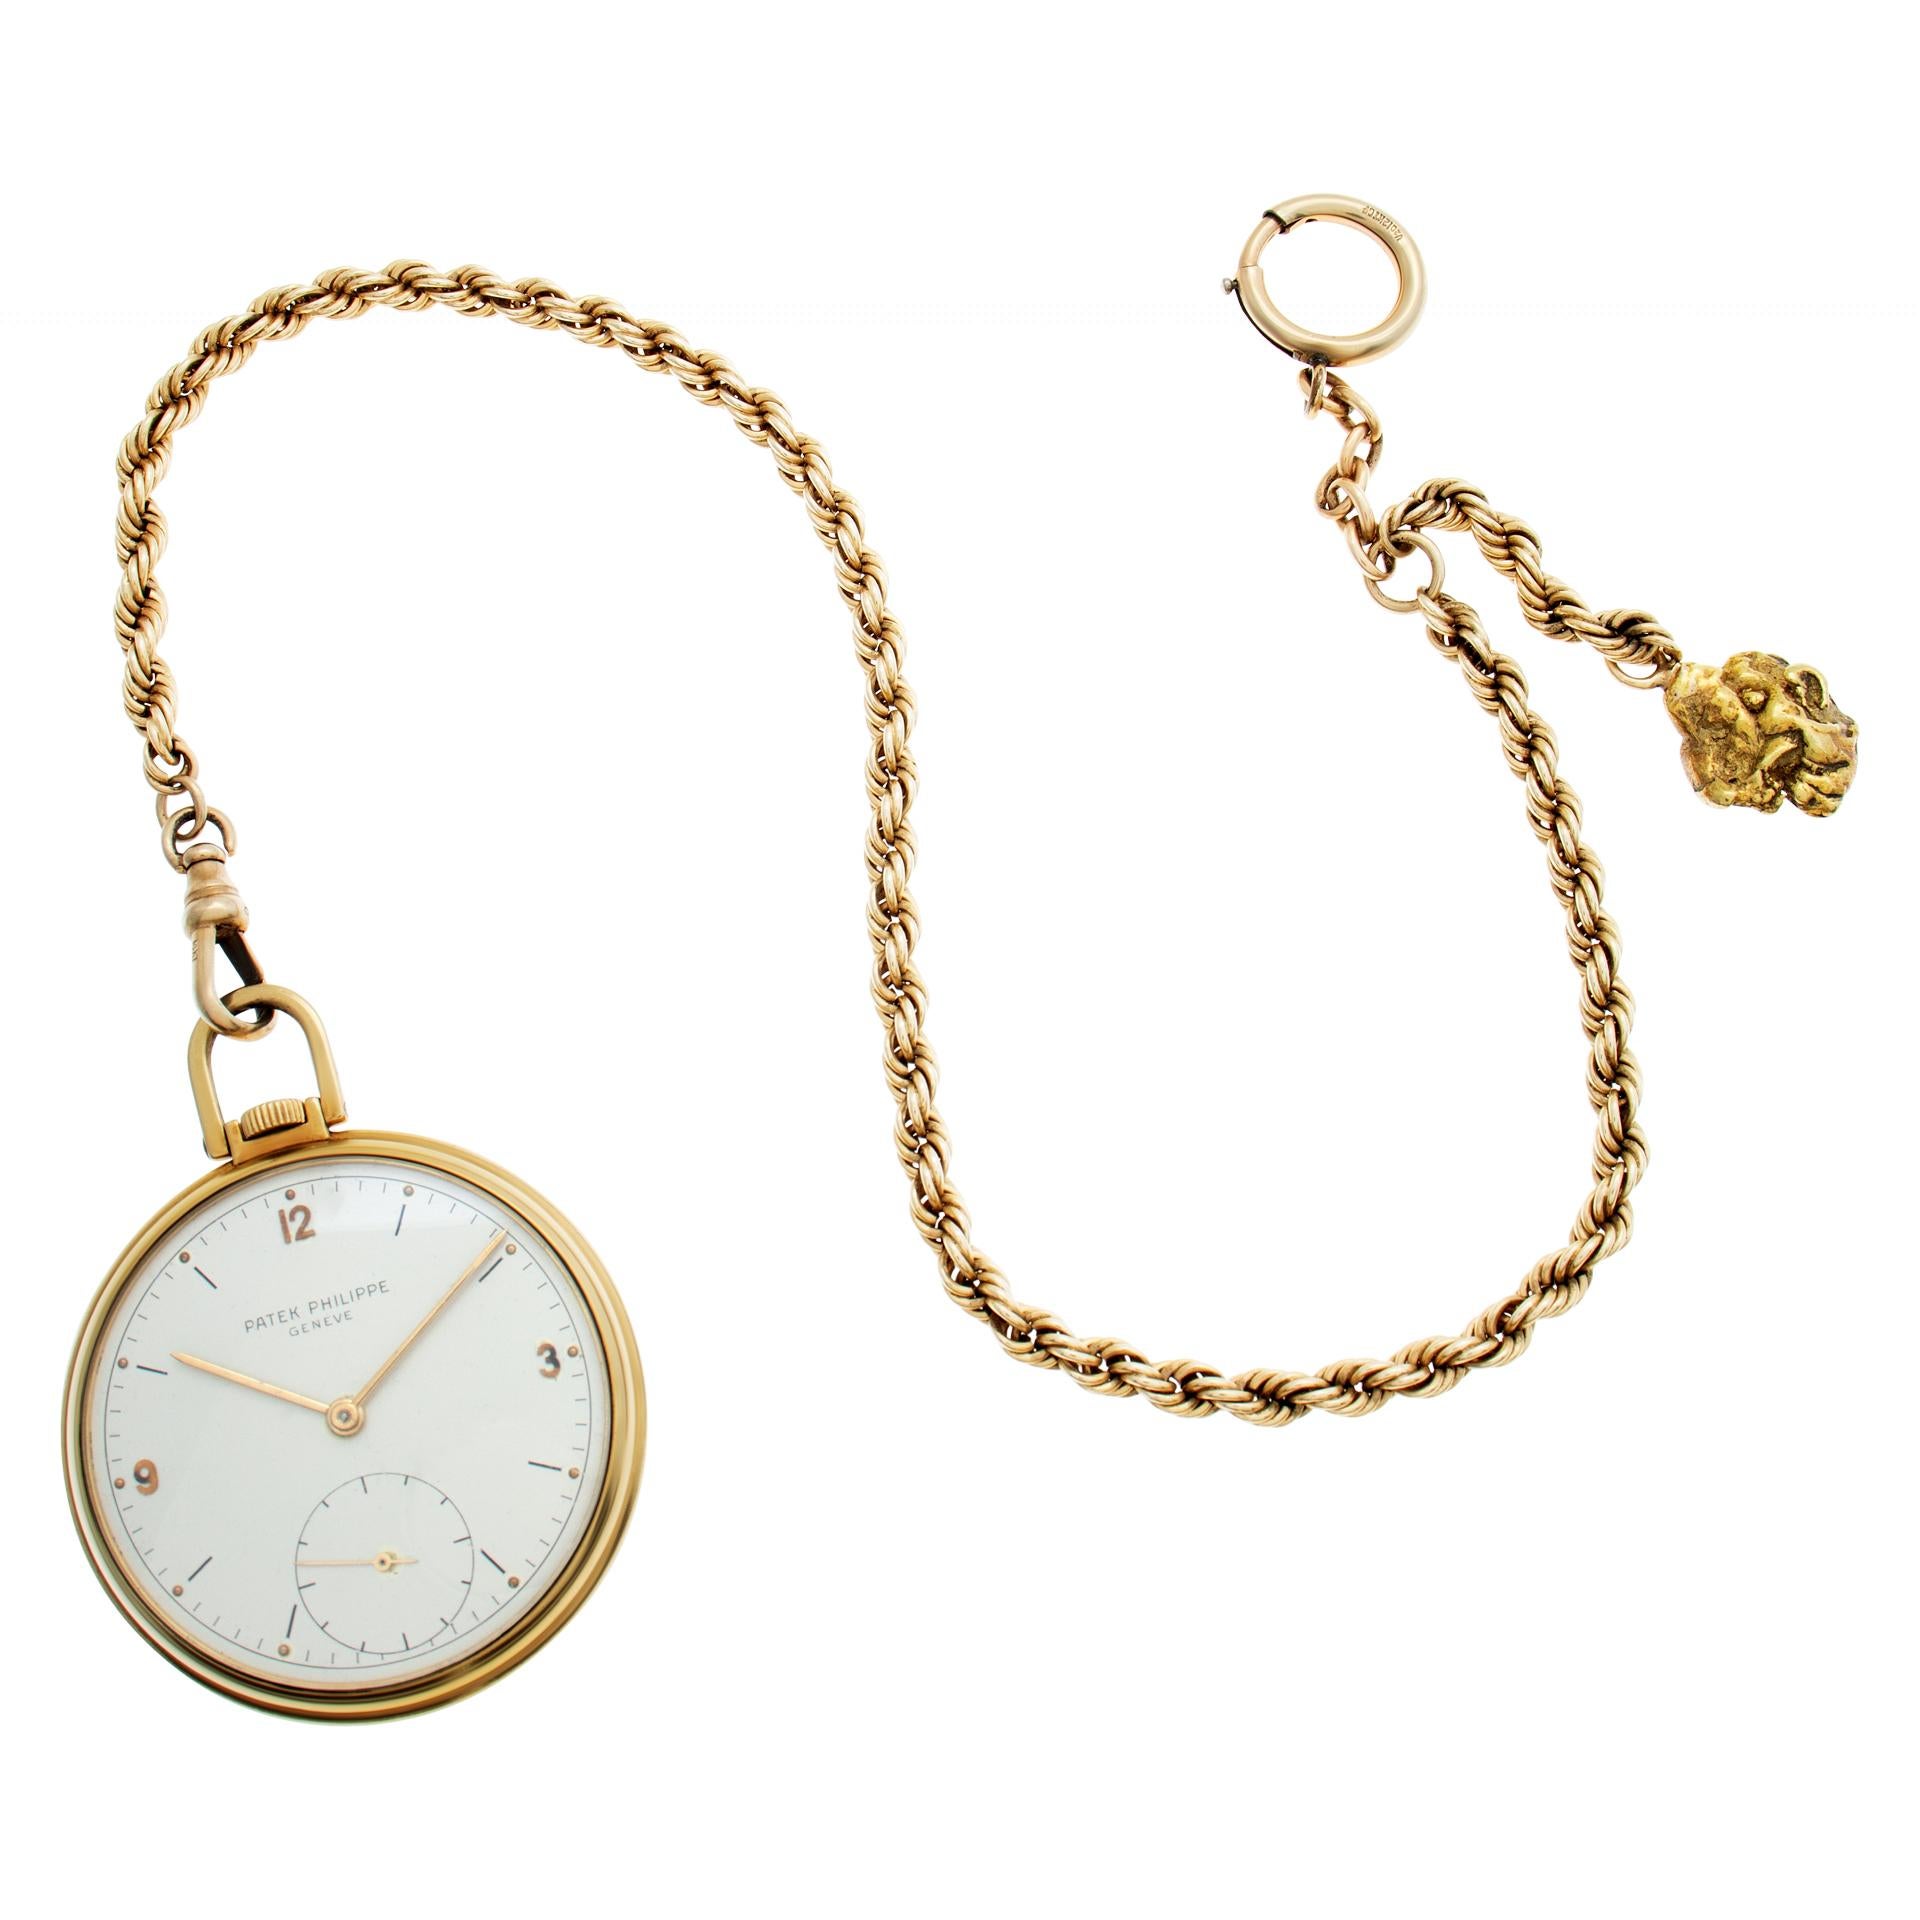 Patek Philippe pocket watch in 18k yellow gold. Manual w/ subseconds. 45 mm case size. Comes with a 14k chain with gold nugget on the end. Fine Pre-owned Patek Philippe Watch. Certified preowned Vintage Patek Philippe pocket watch 726 watch is made